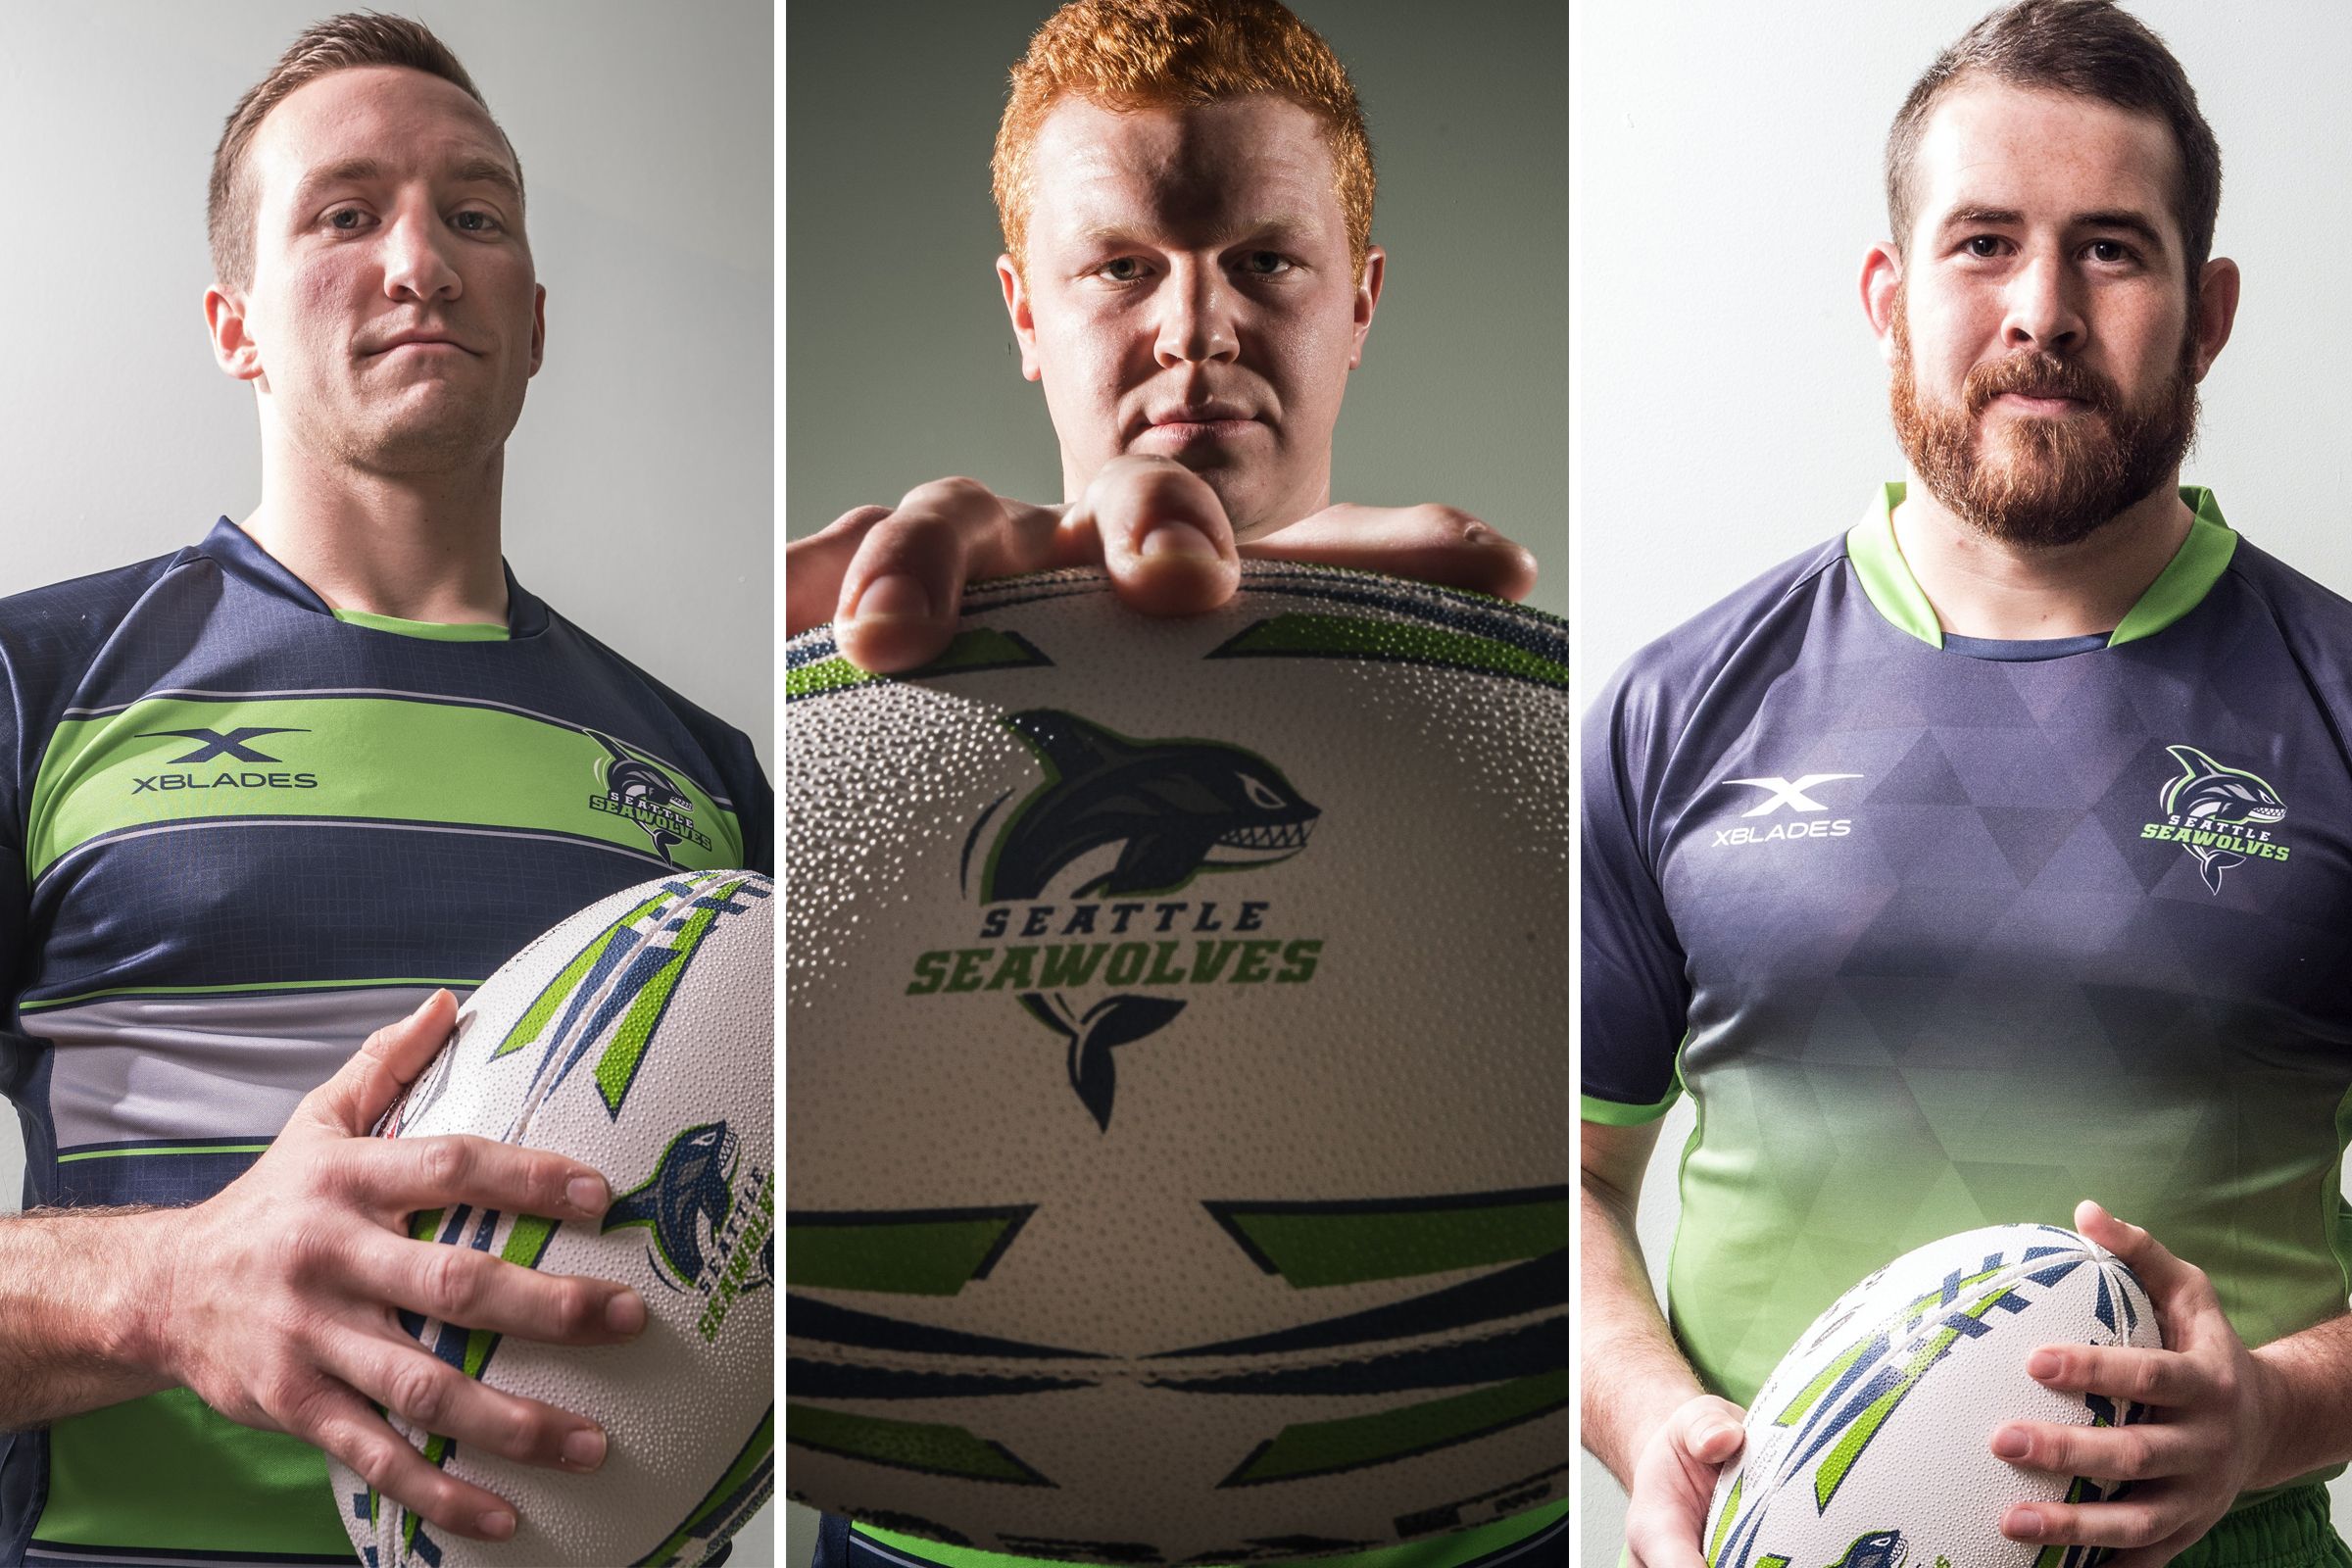 Seattles hottest new startup is no tech company Get to know the Seawolves and professional rugby The Seattle Times